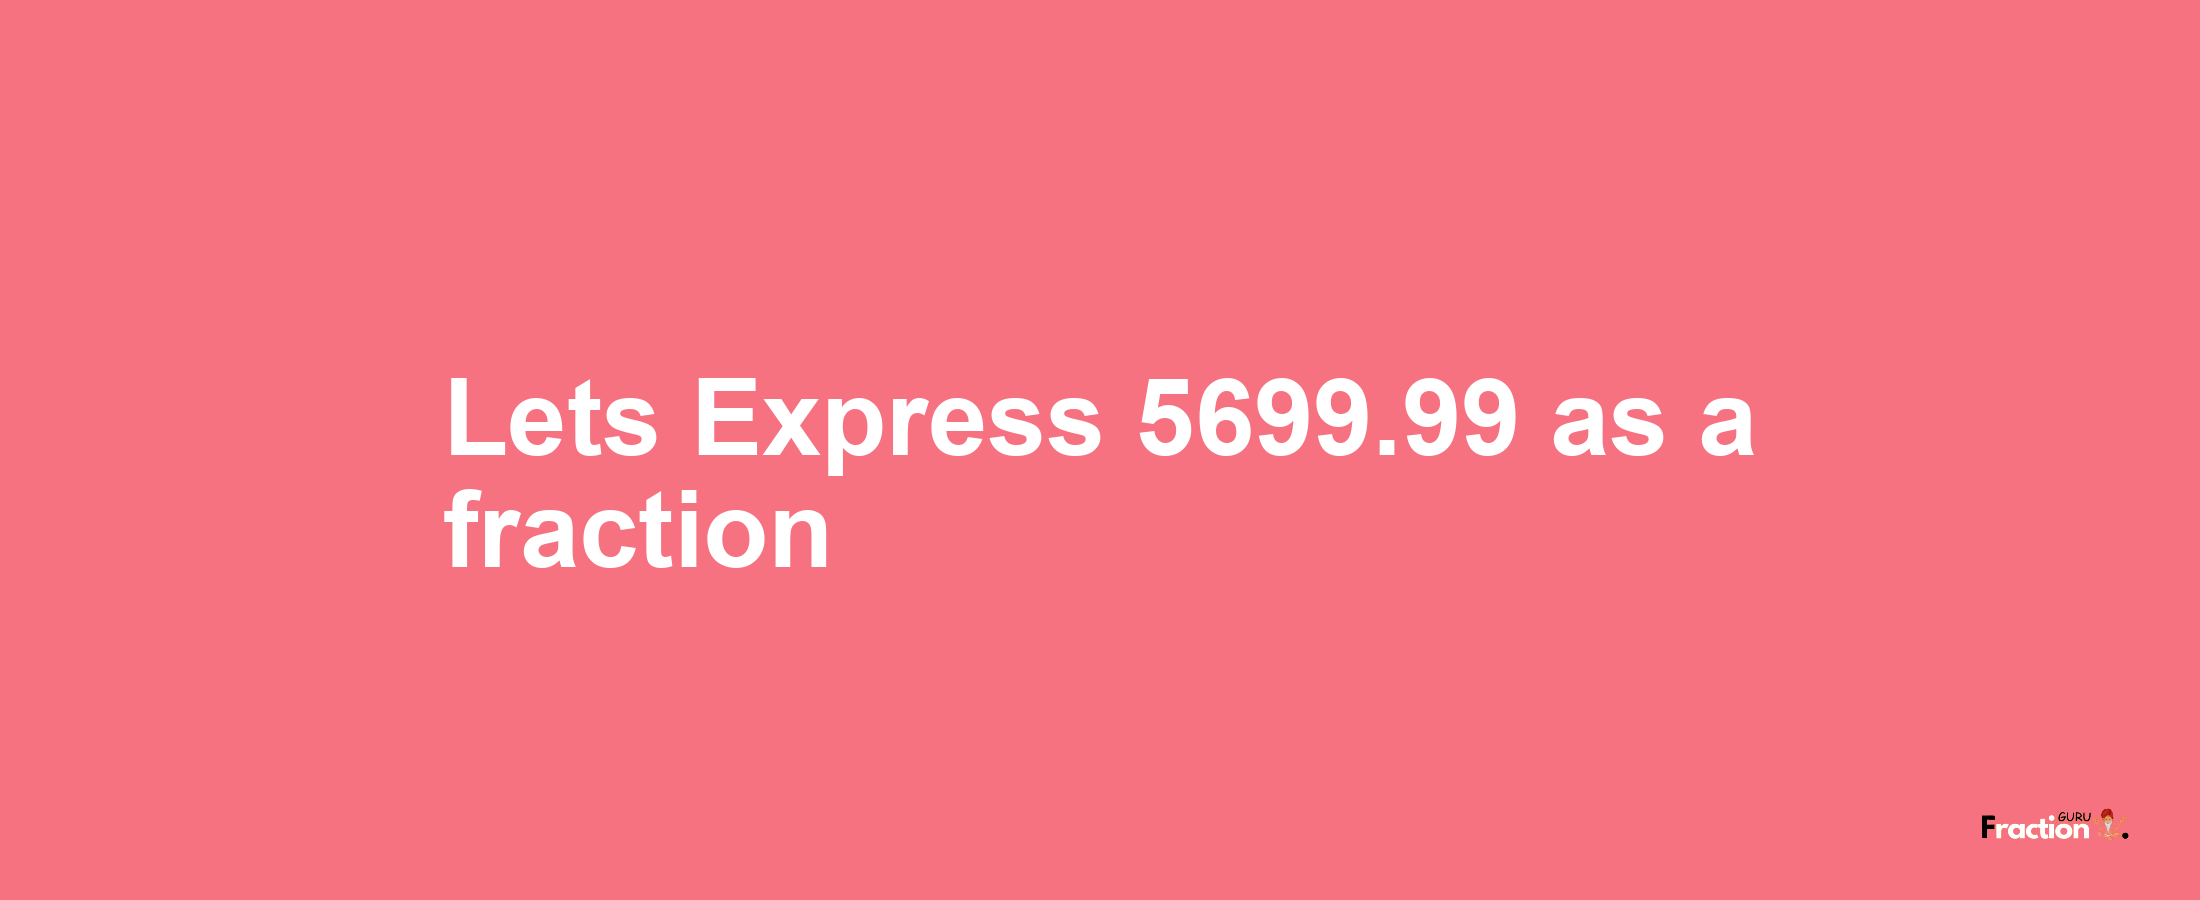 Lets Express 5699.99 as afraction